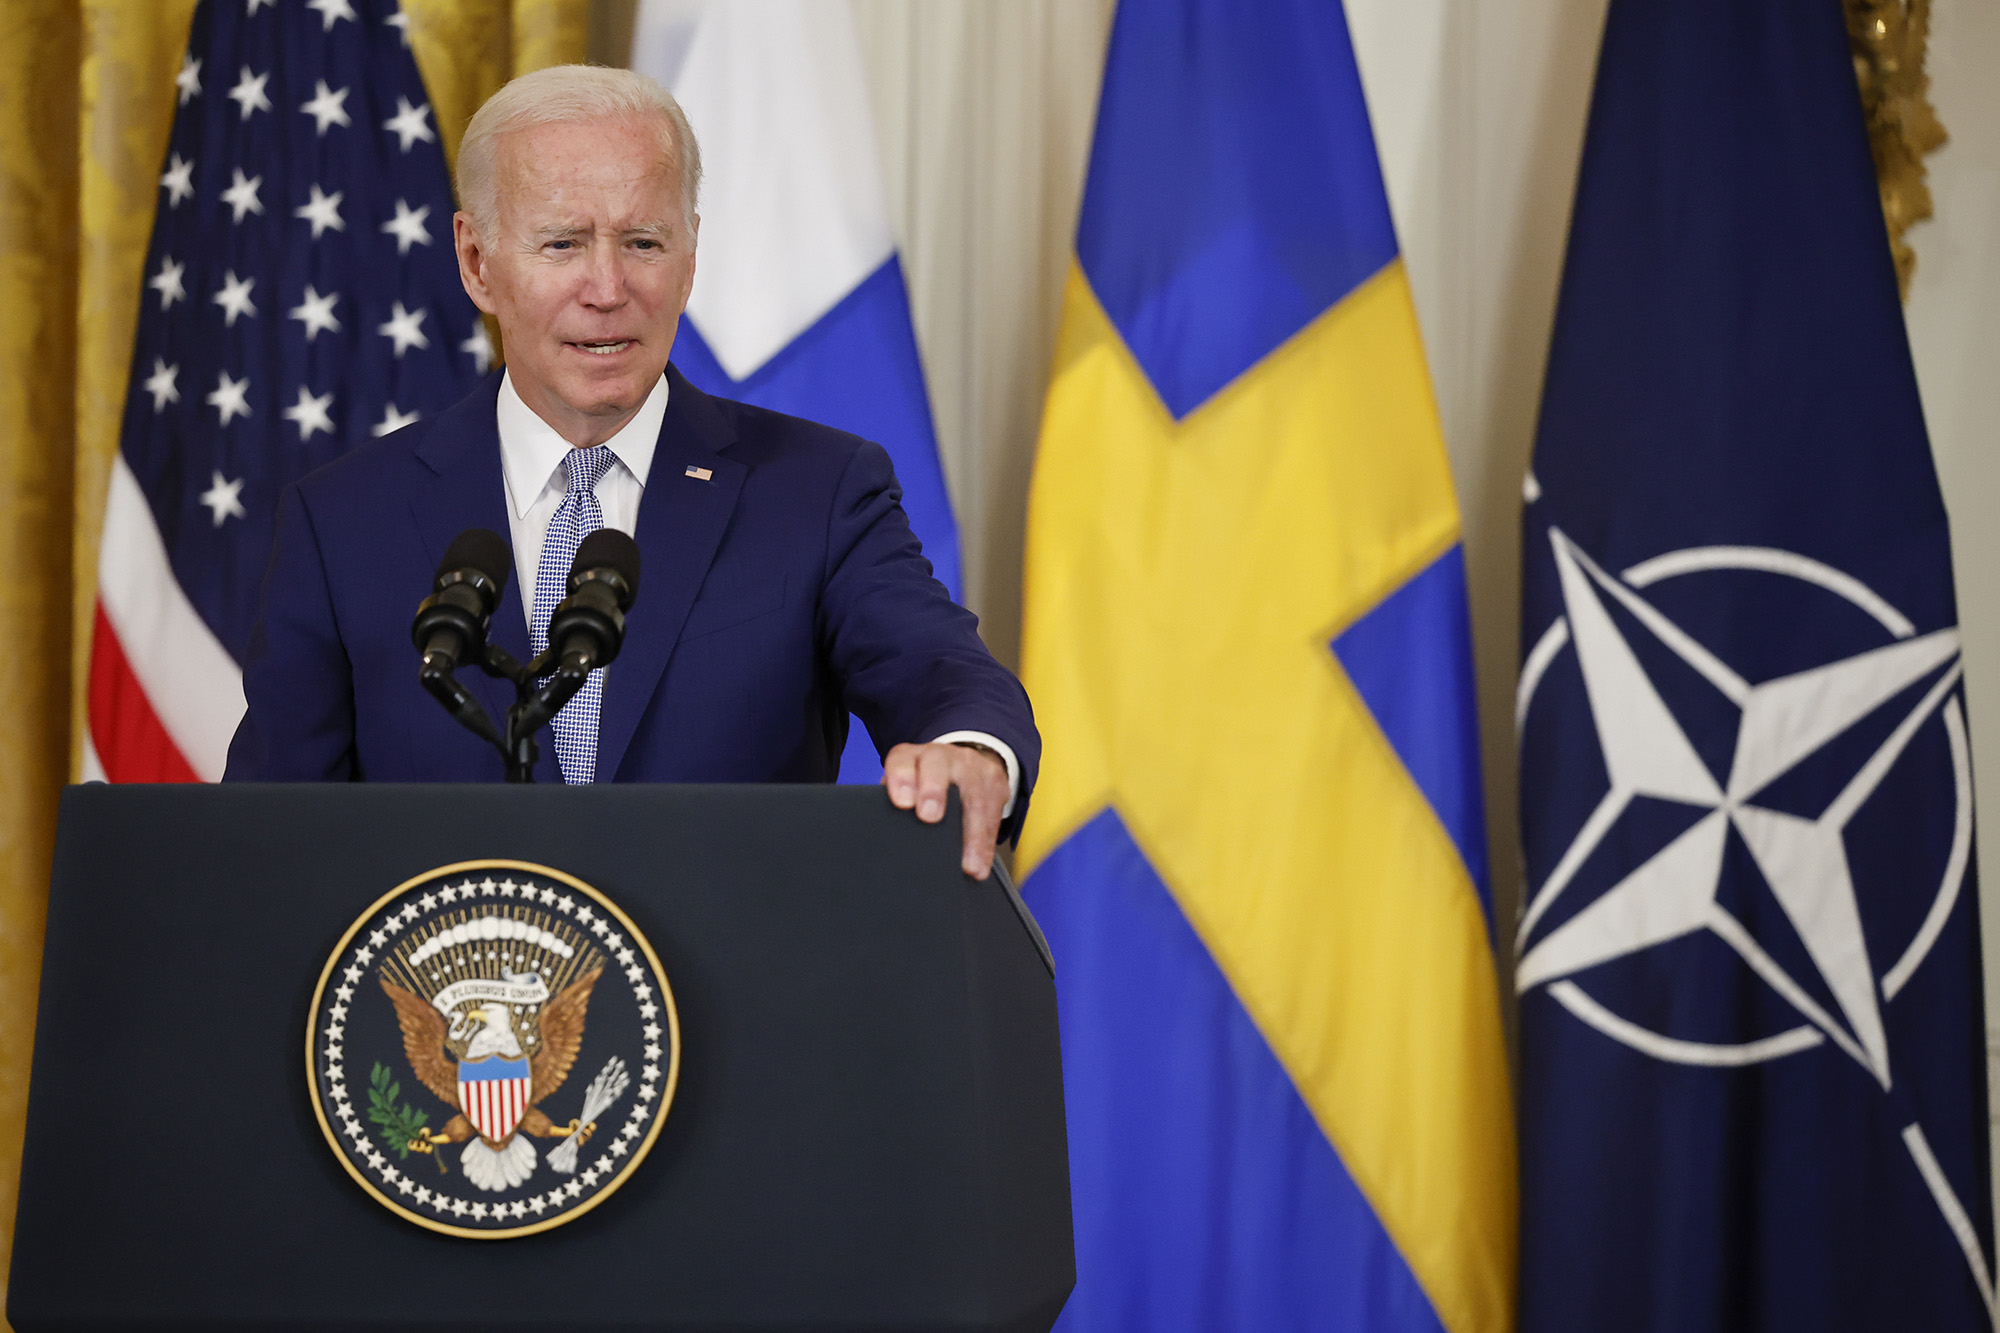 President Joe Biden speaks before signing the agreement for Finland and Sweden to be included in the North Atlantic Treaty Organization (NATO) in the East Room of the White House on August 9. 